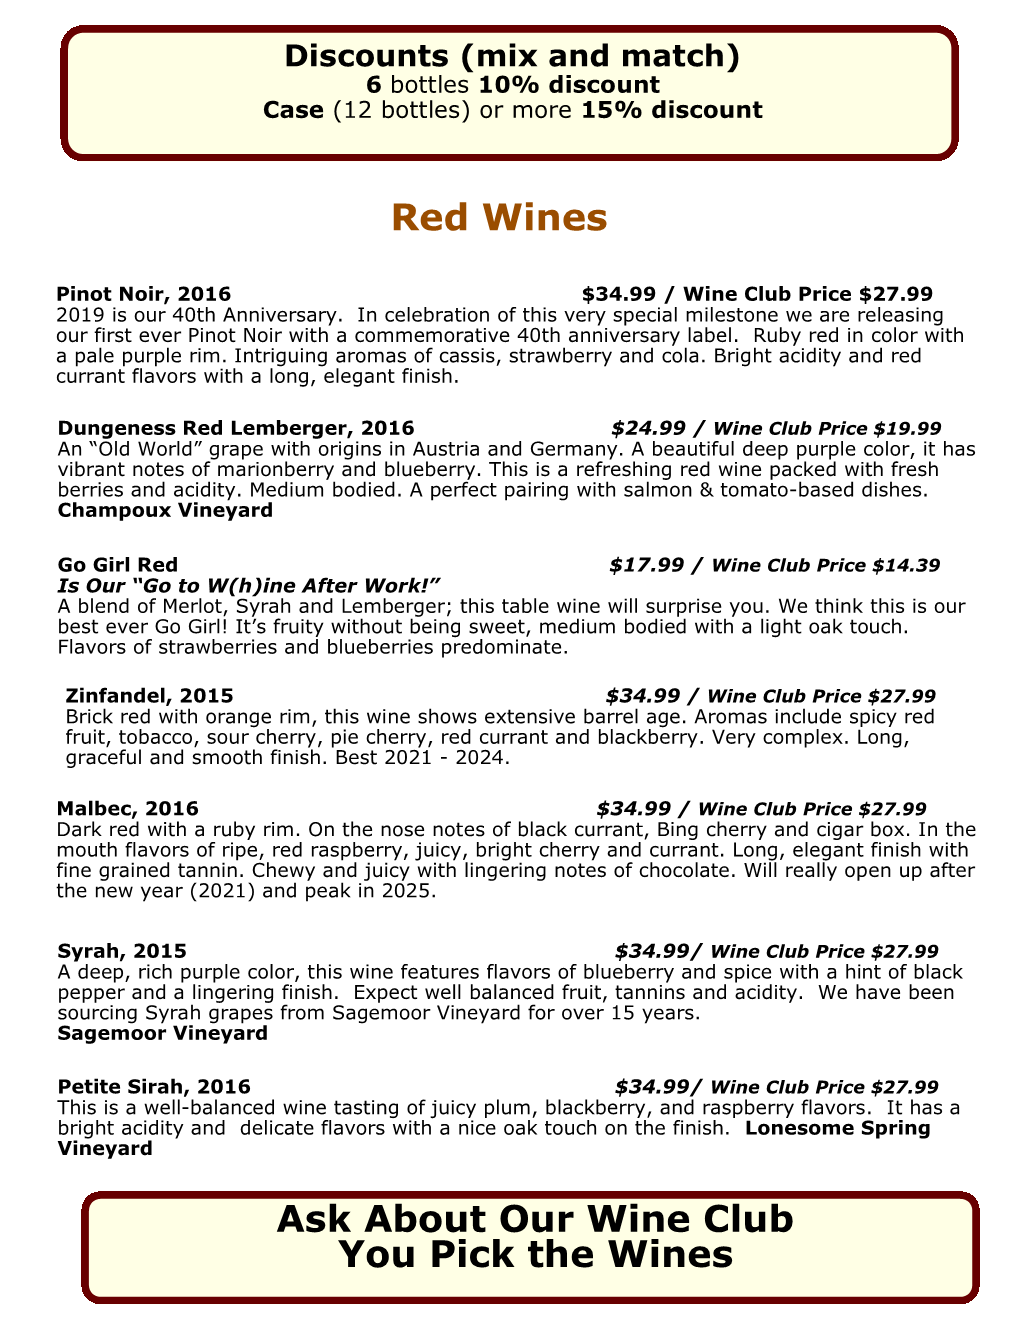 Ask About Our Wine Club You Pick the Wines Red Wines